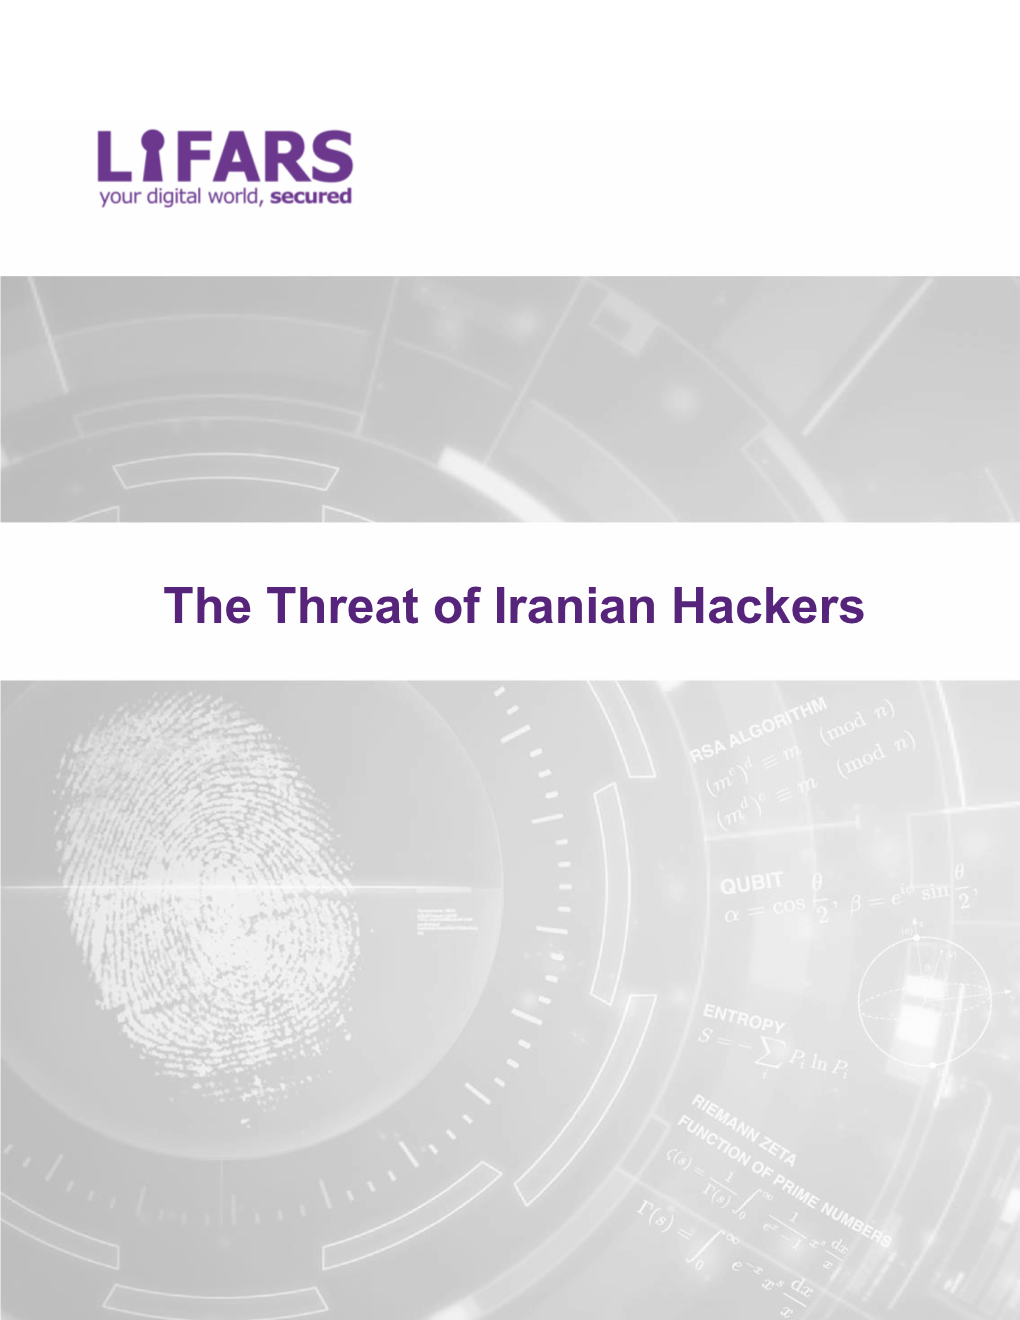 The Theart of Iranian Hackers